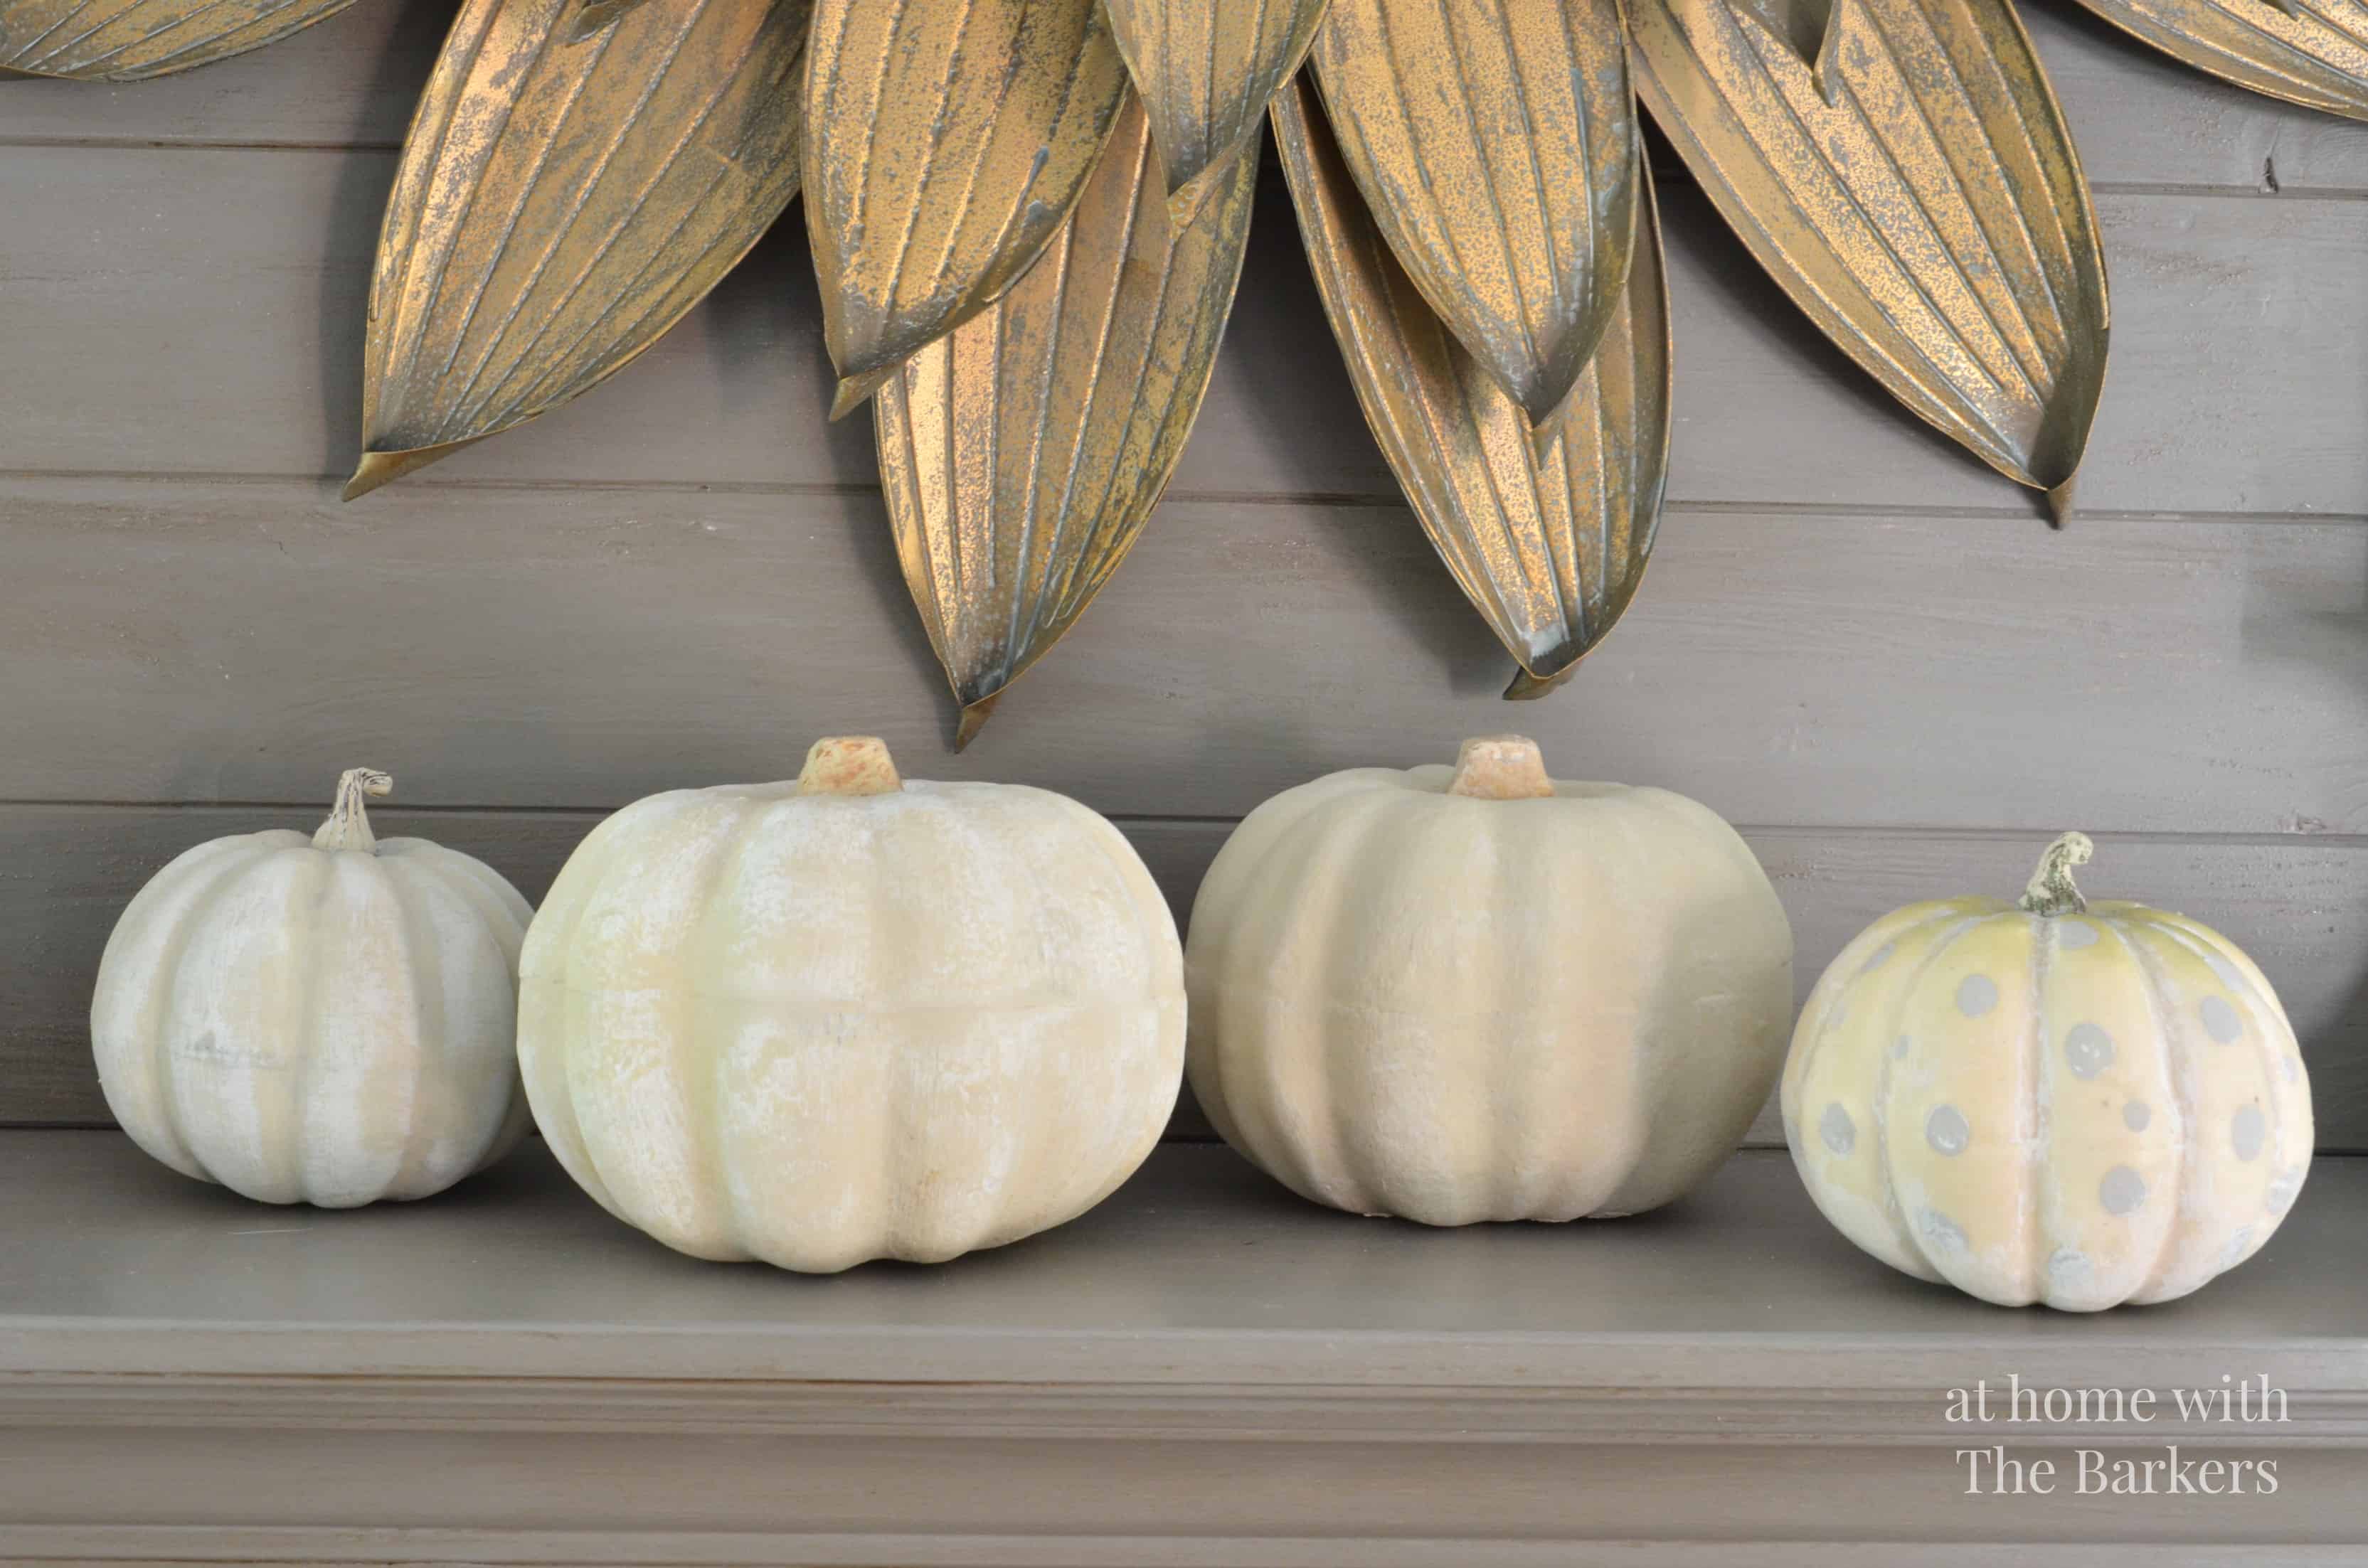 https://athomewiththebarkers.com/wp-content/uploads/2014/09/Welcome-Home-Fall-Tour-At-Home-with-The-Barkers-Painted-Pumpkins.jpg